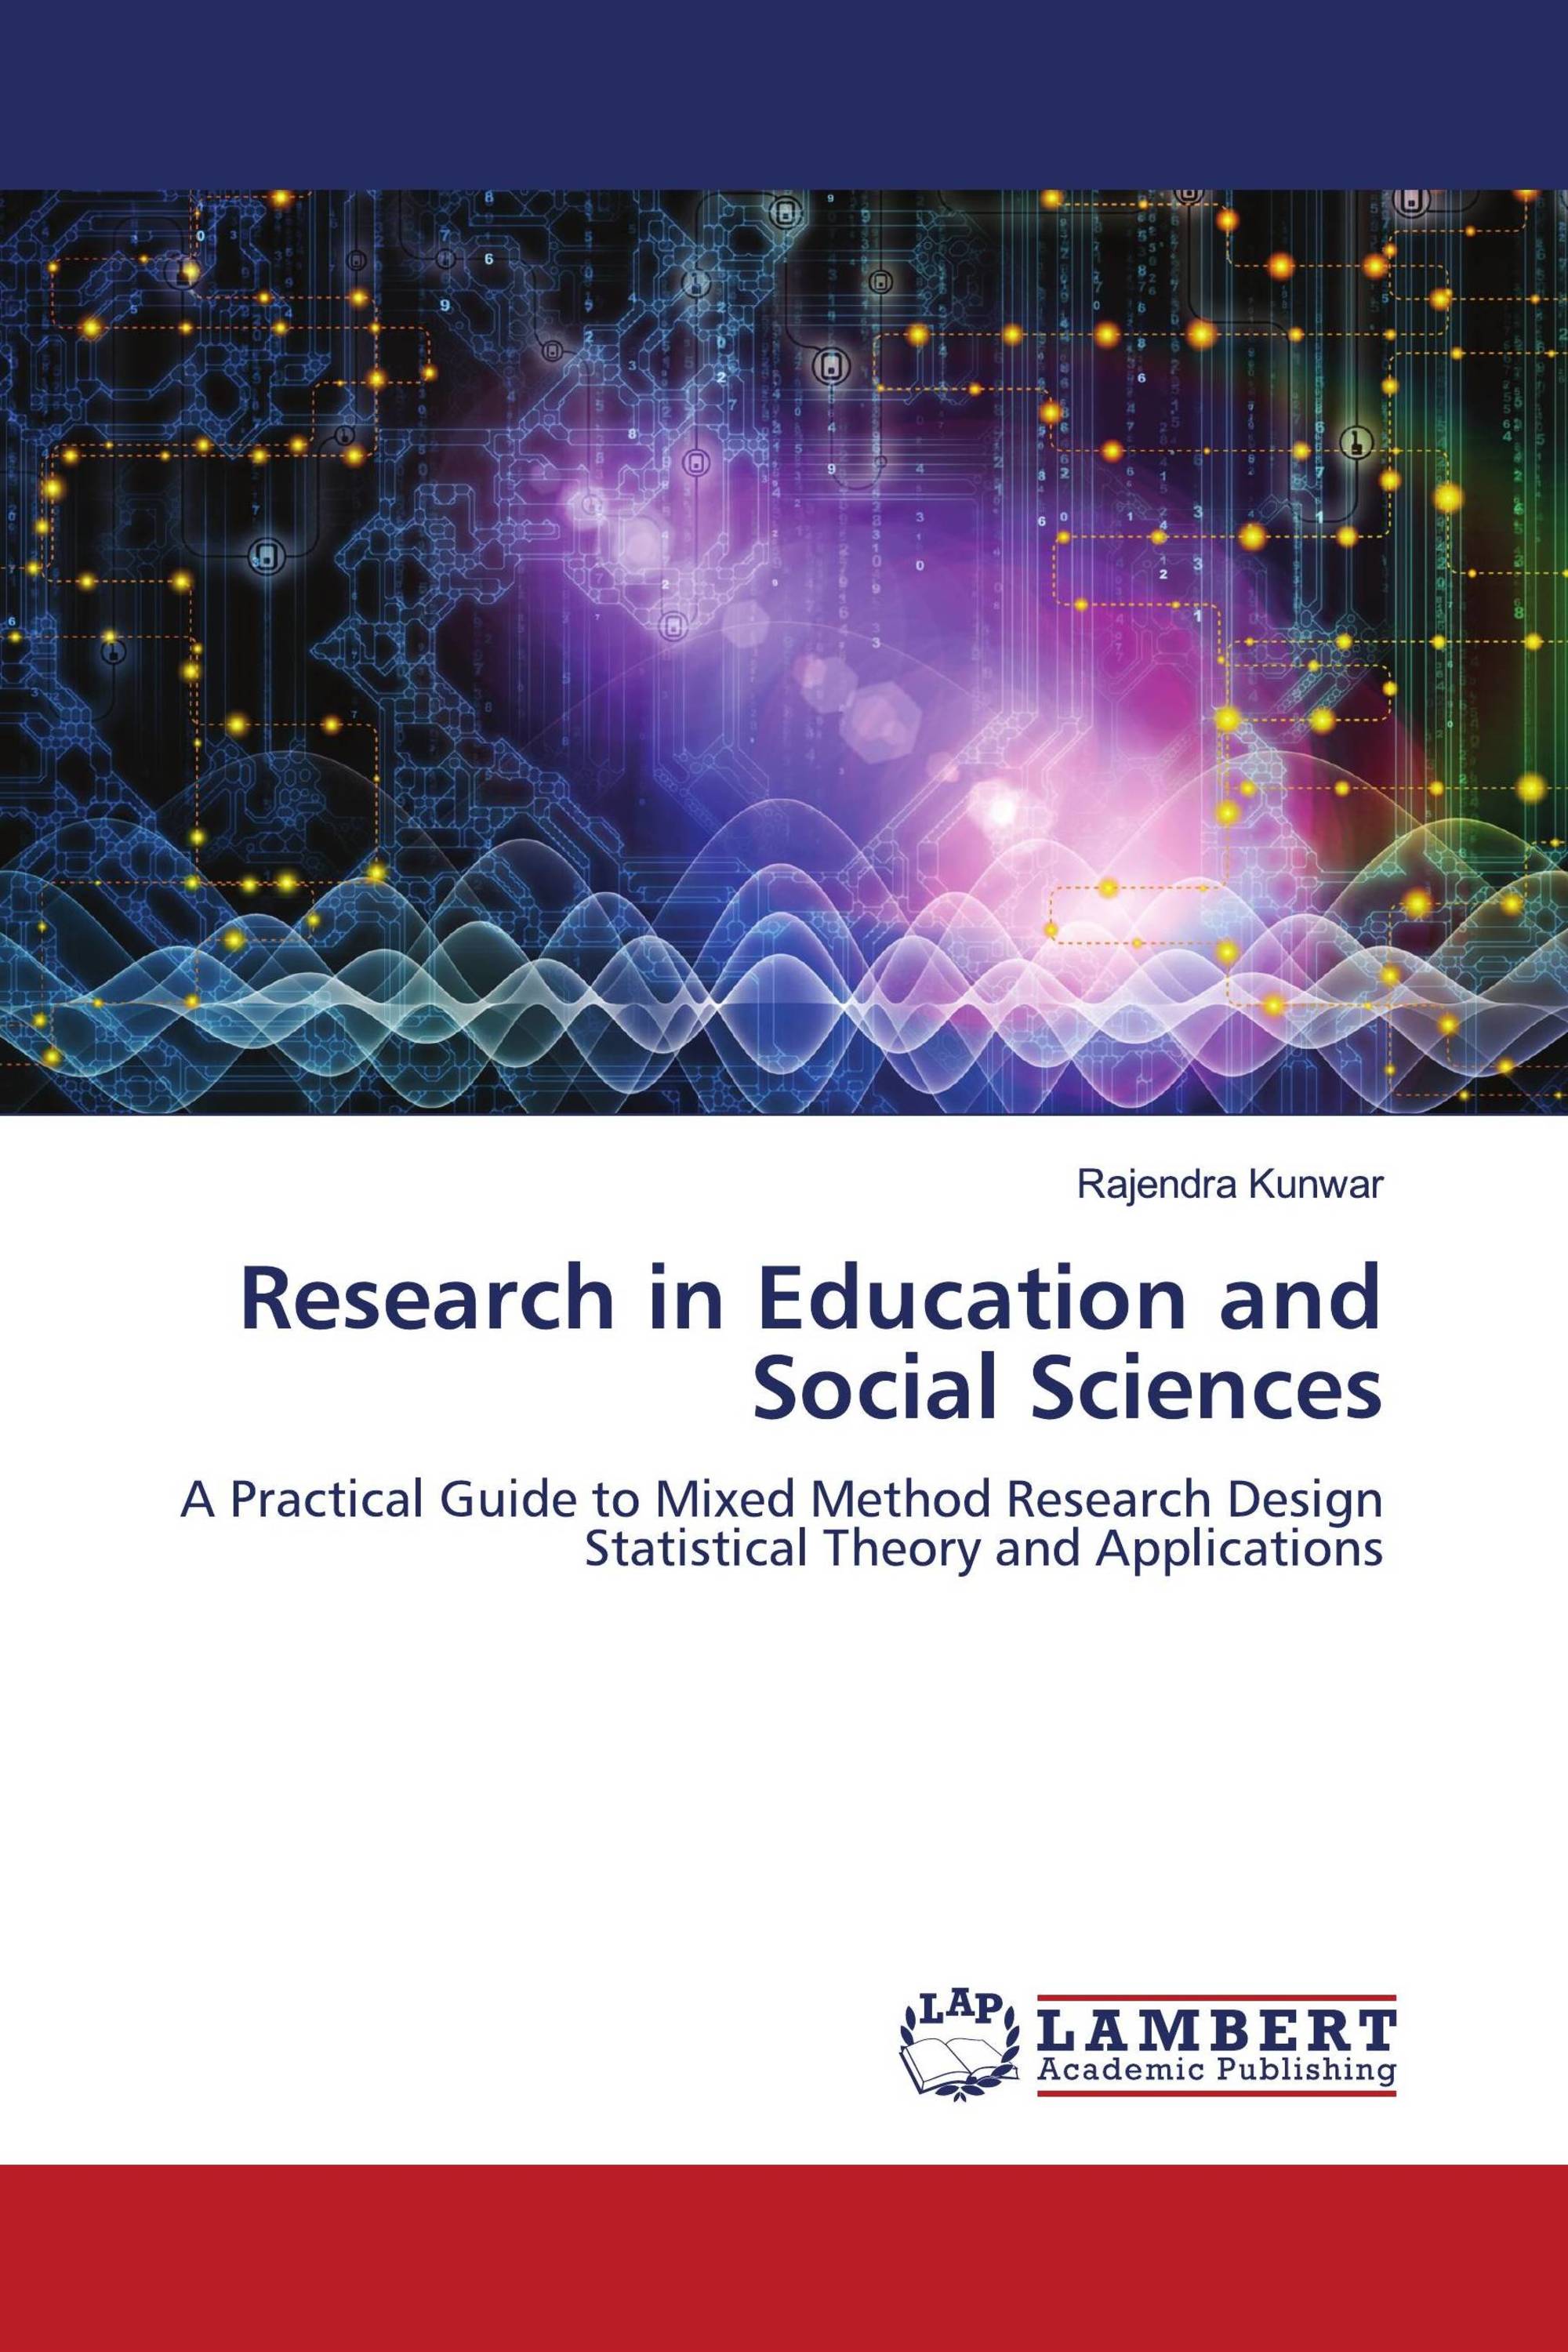 Research in Education and Social Sciences